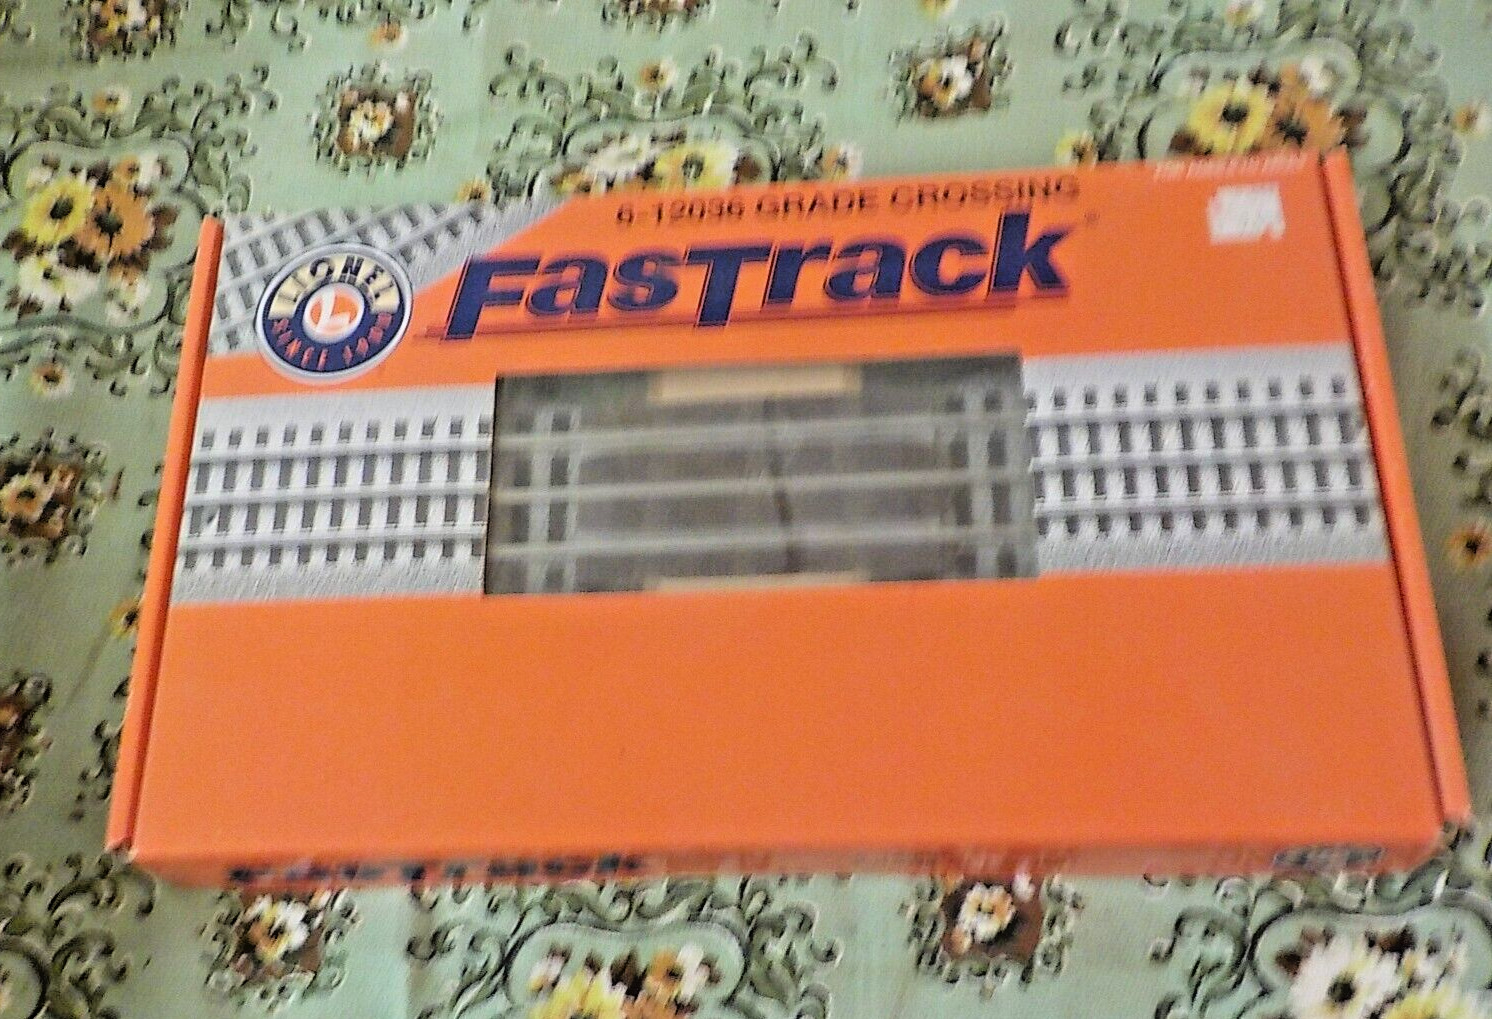 Lionel 6-12036 FasTrack Grade Crossing (Fast Track) O Gauge NEW IN BOX SET OF 2